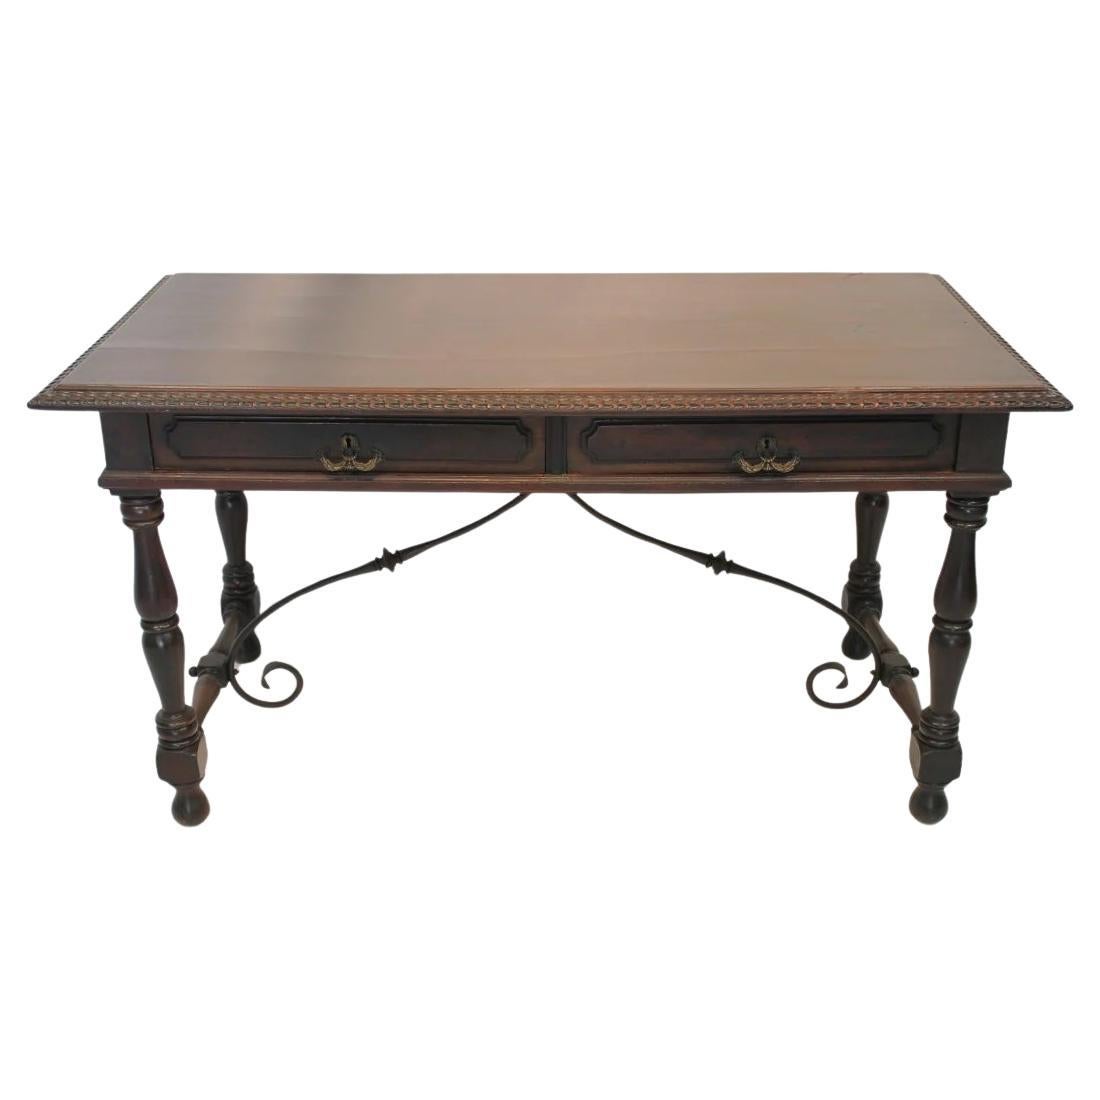 Antique Spanish Colonial Revival Desk with Iron Stretcher Bars Circa 1900 For Sale